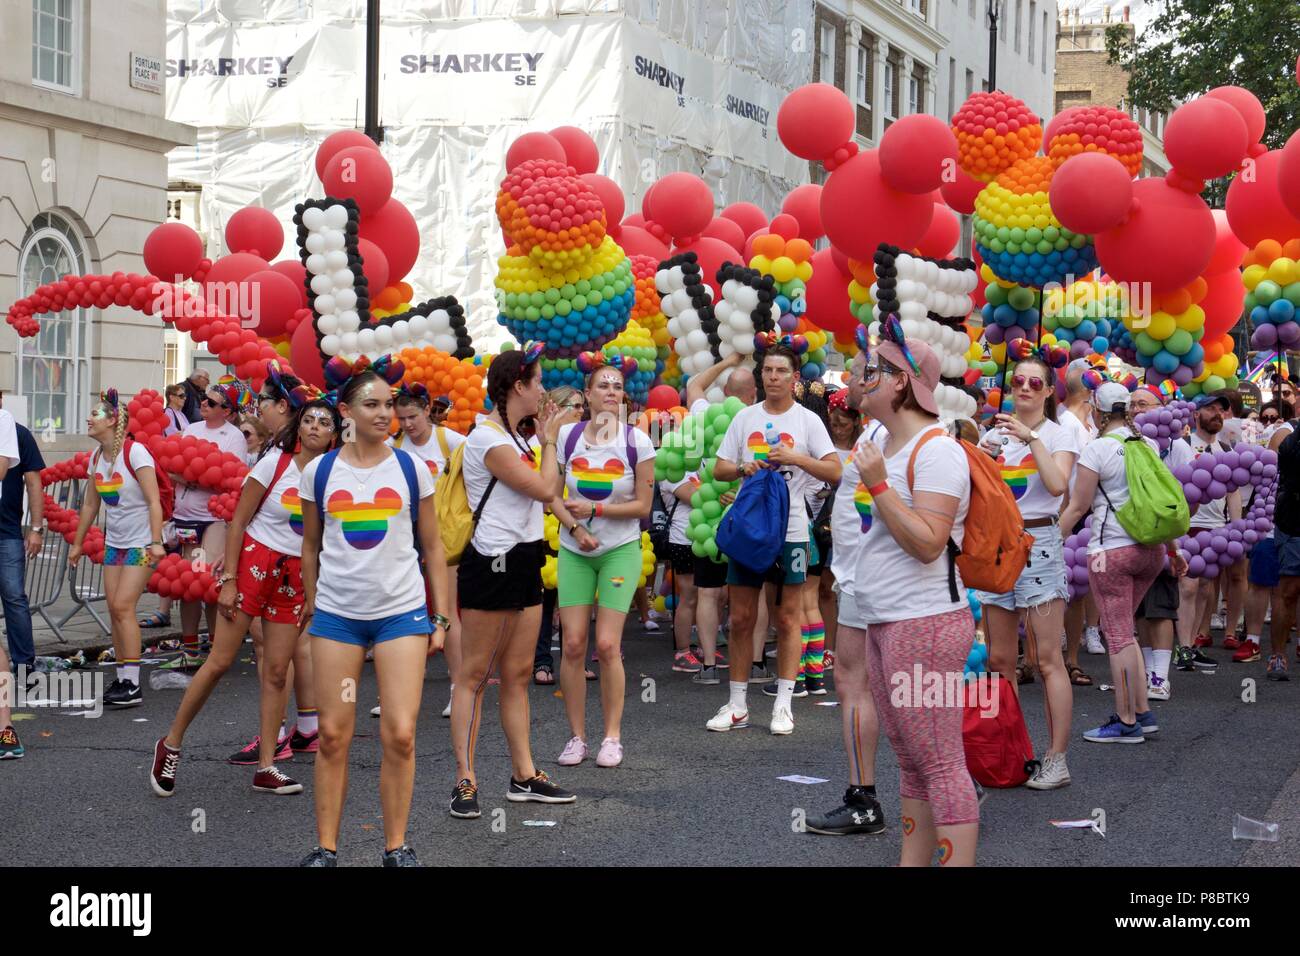 Disney employees with rainbow balloons at Pride in London 2018 Parade Stock Photo